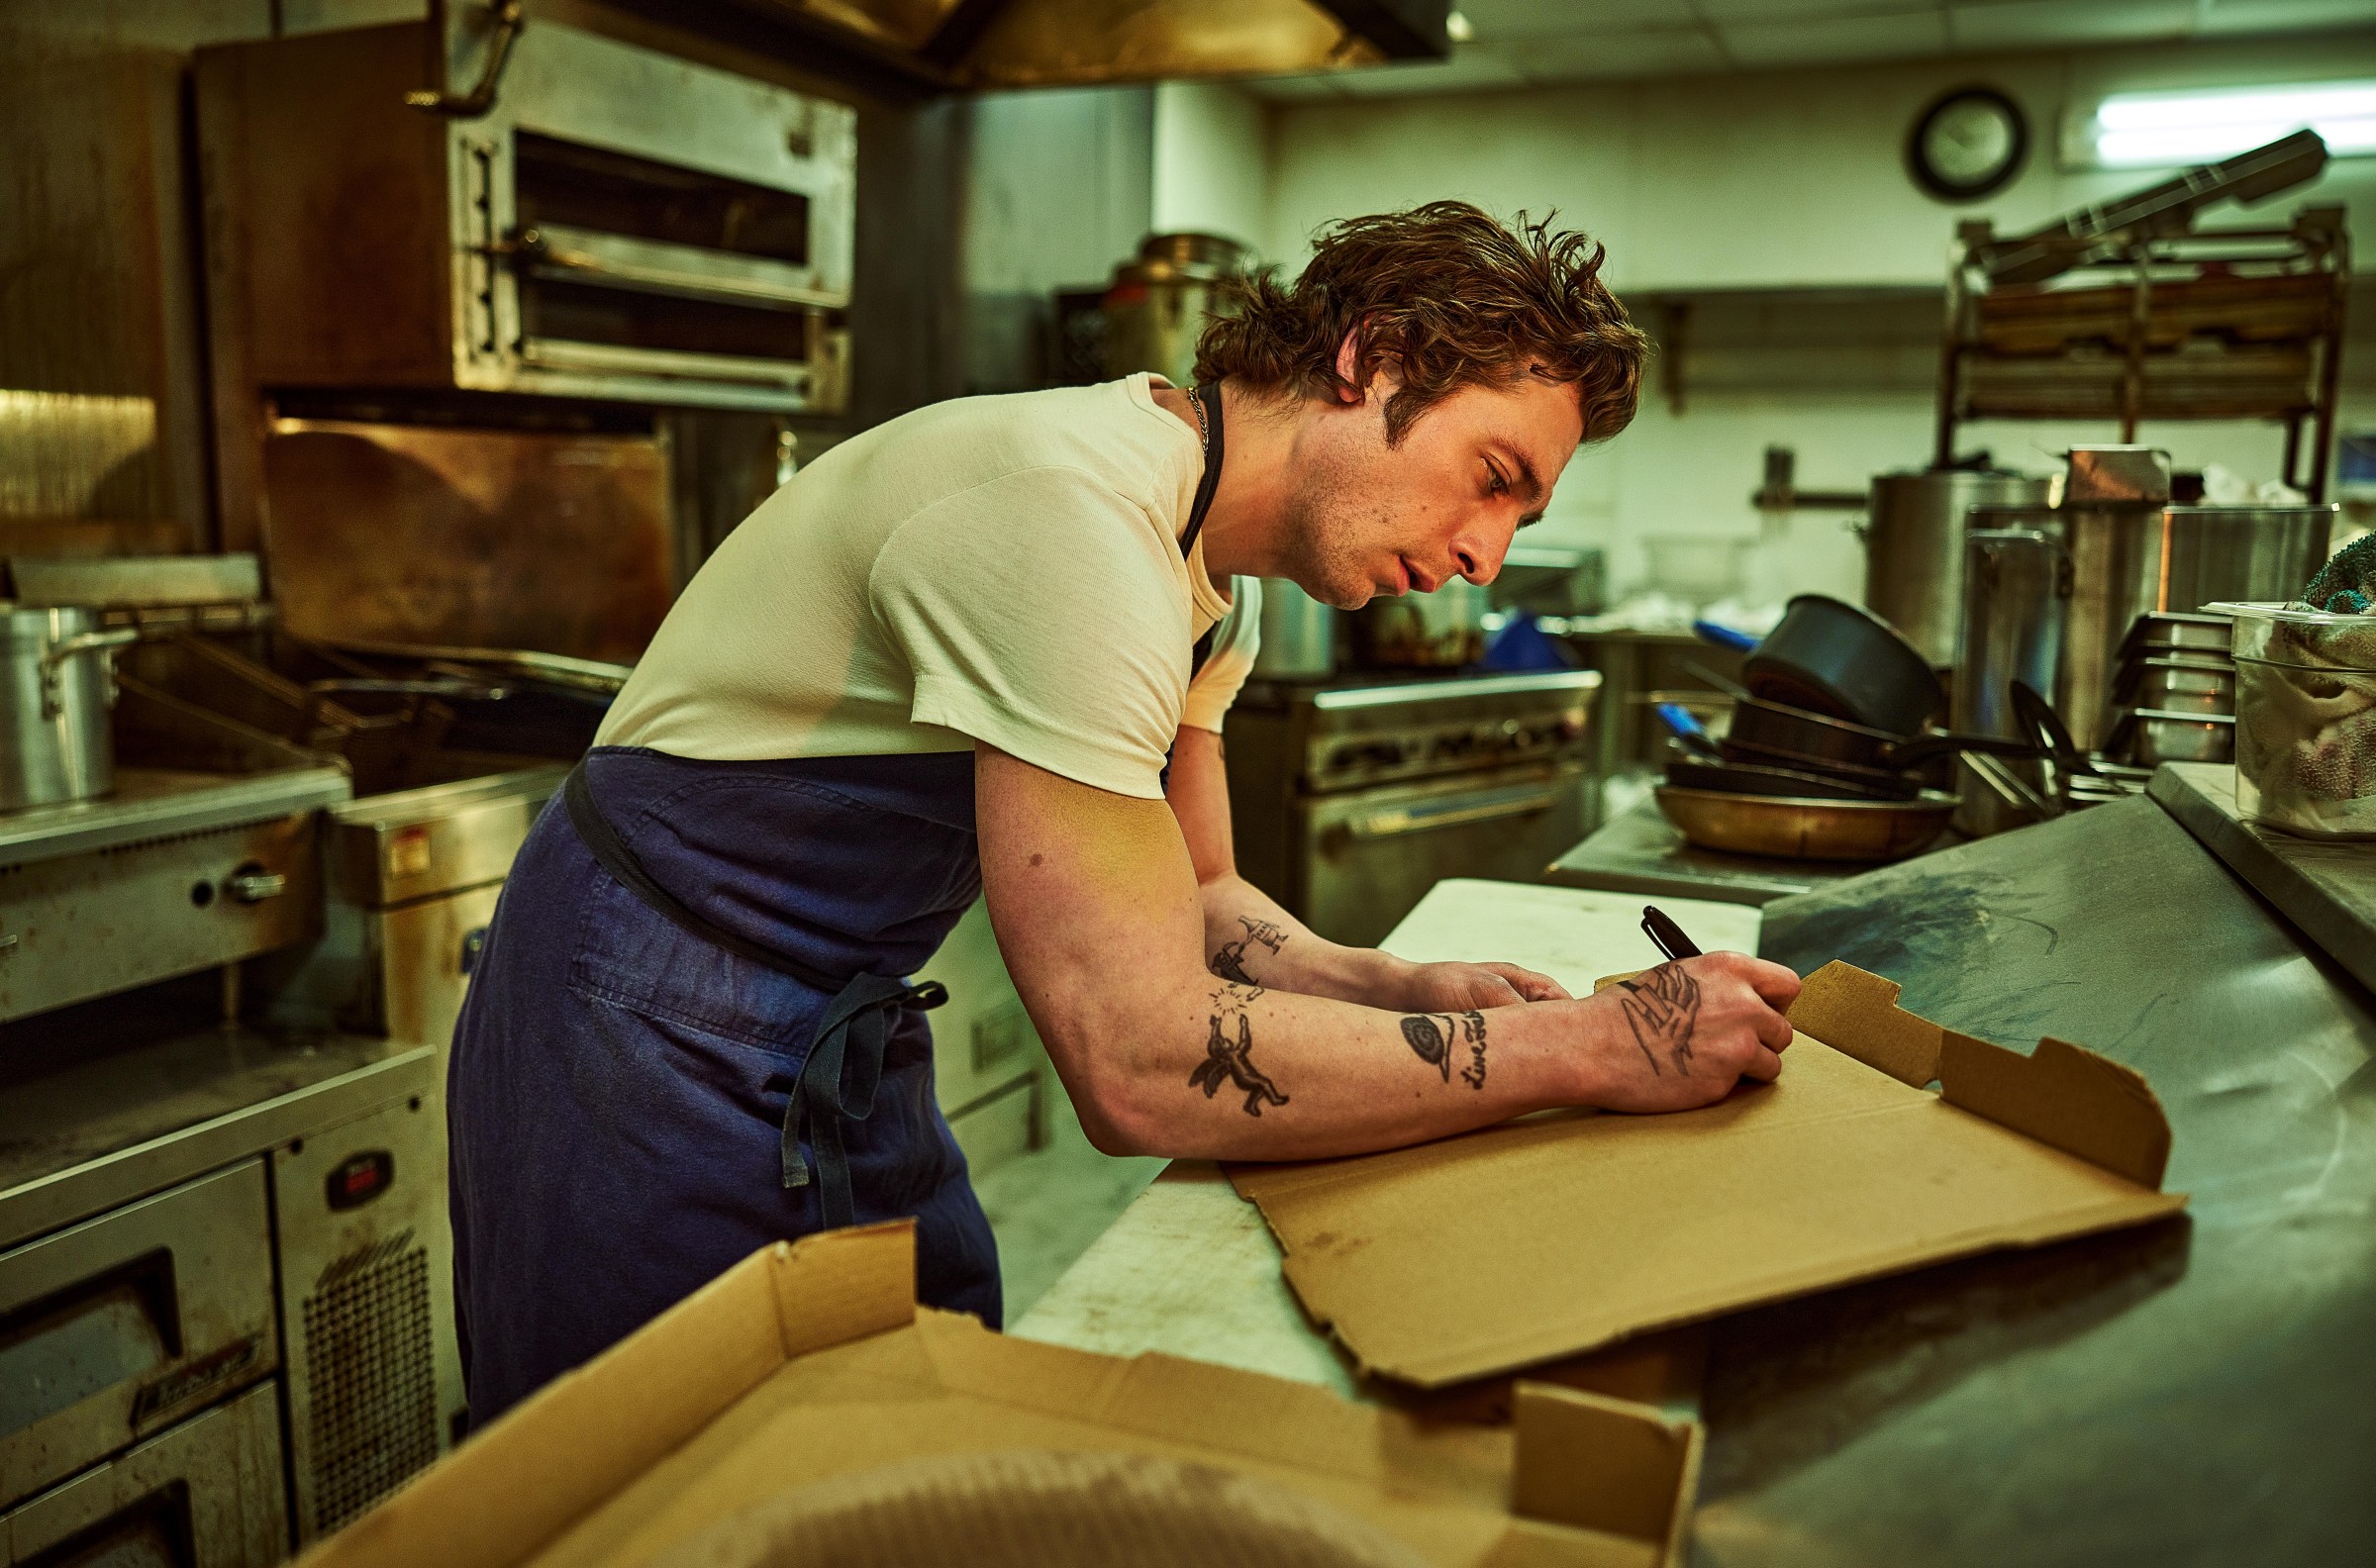 A tattooed man in a white T-shirt and blue apron leans over a kitchen counter, writing on a piece of cardboard.